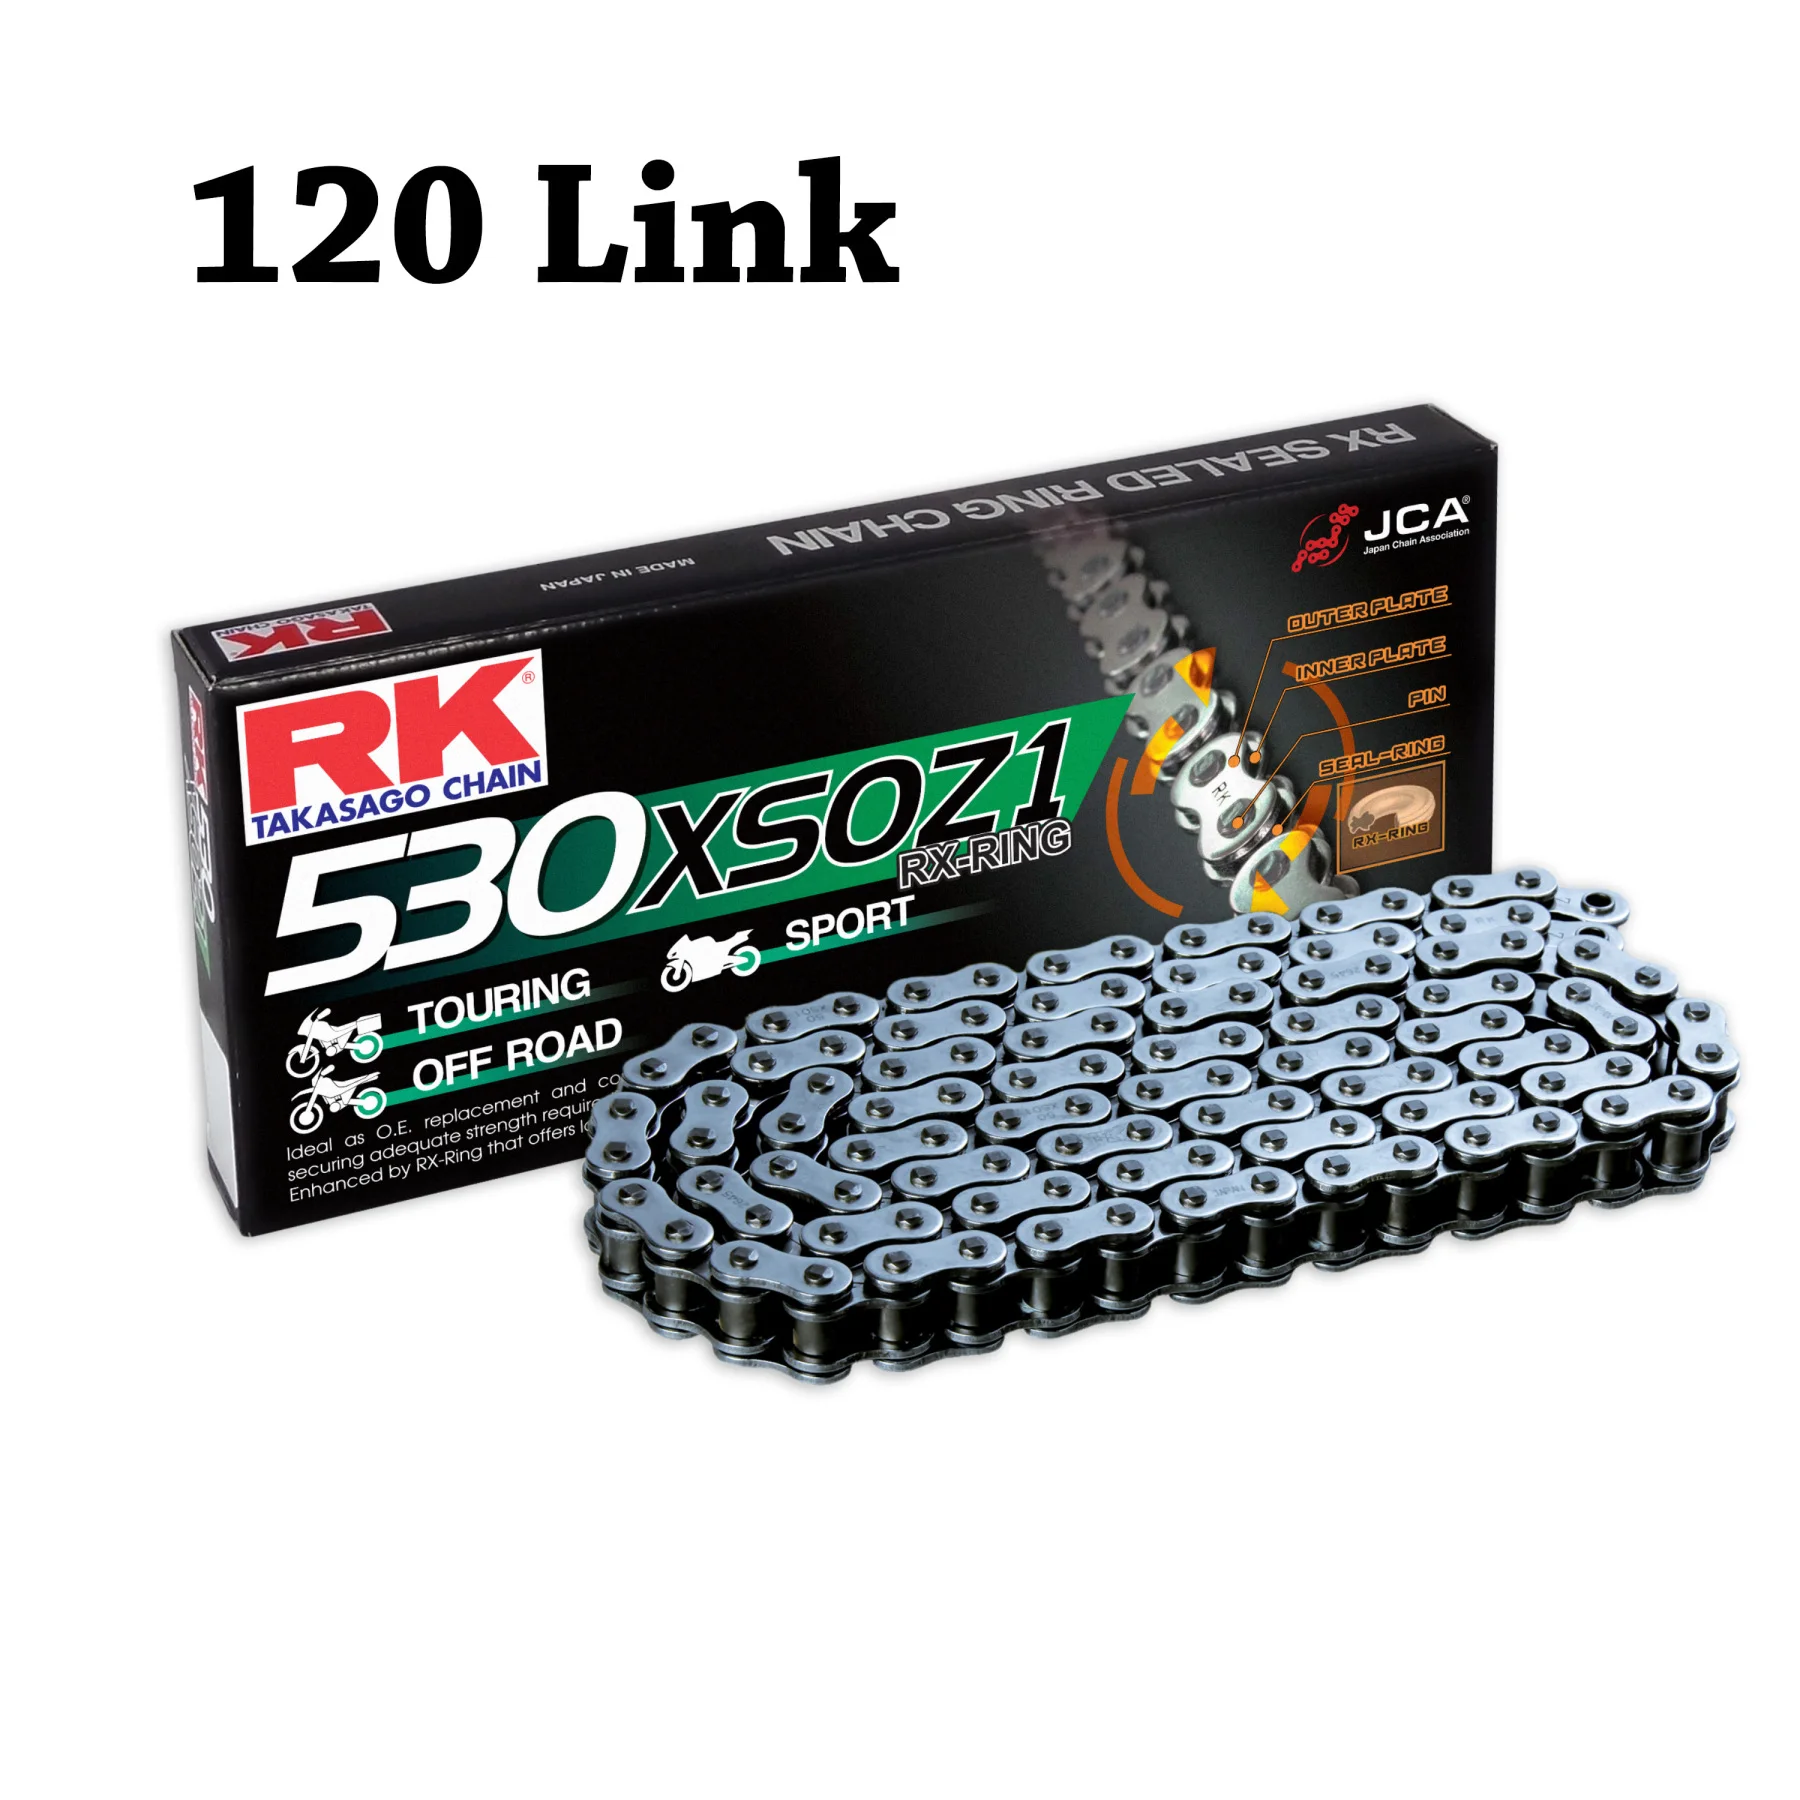 

RK Motorcycle Chain X-Ring 530 XSO 120 L for Benelli 125-250-302-500-600-750-899-900-1130 2C/BN/TNT/TRK/RS/BX/Tre-K/Sei/Tornado